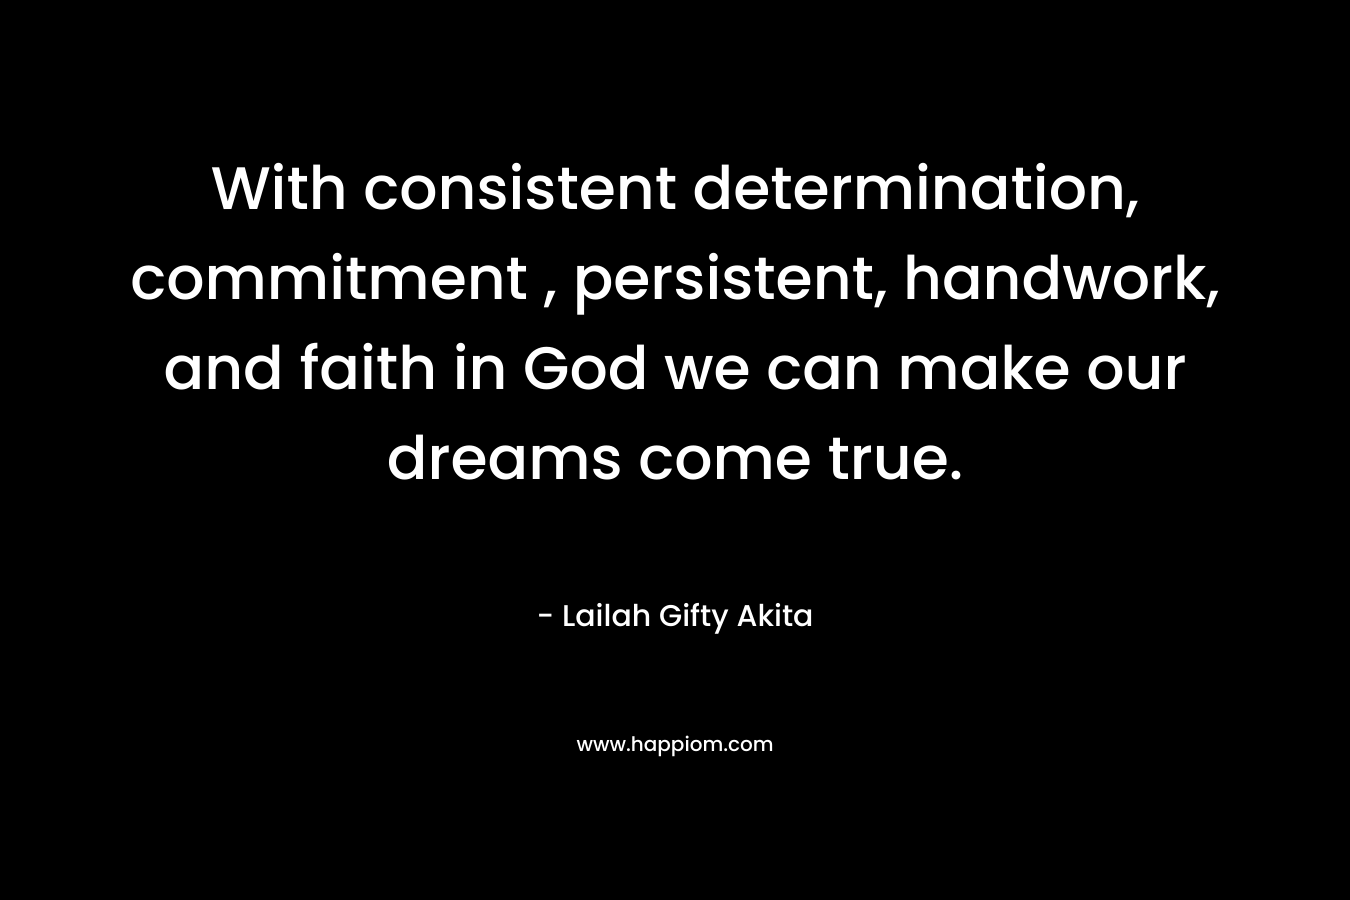 With consistent determination, commitment , persistent, handwork, and faith in God we can make our dreams come true. – Lailah Gifty Akita